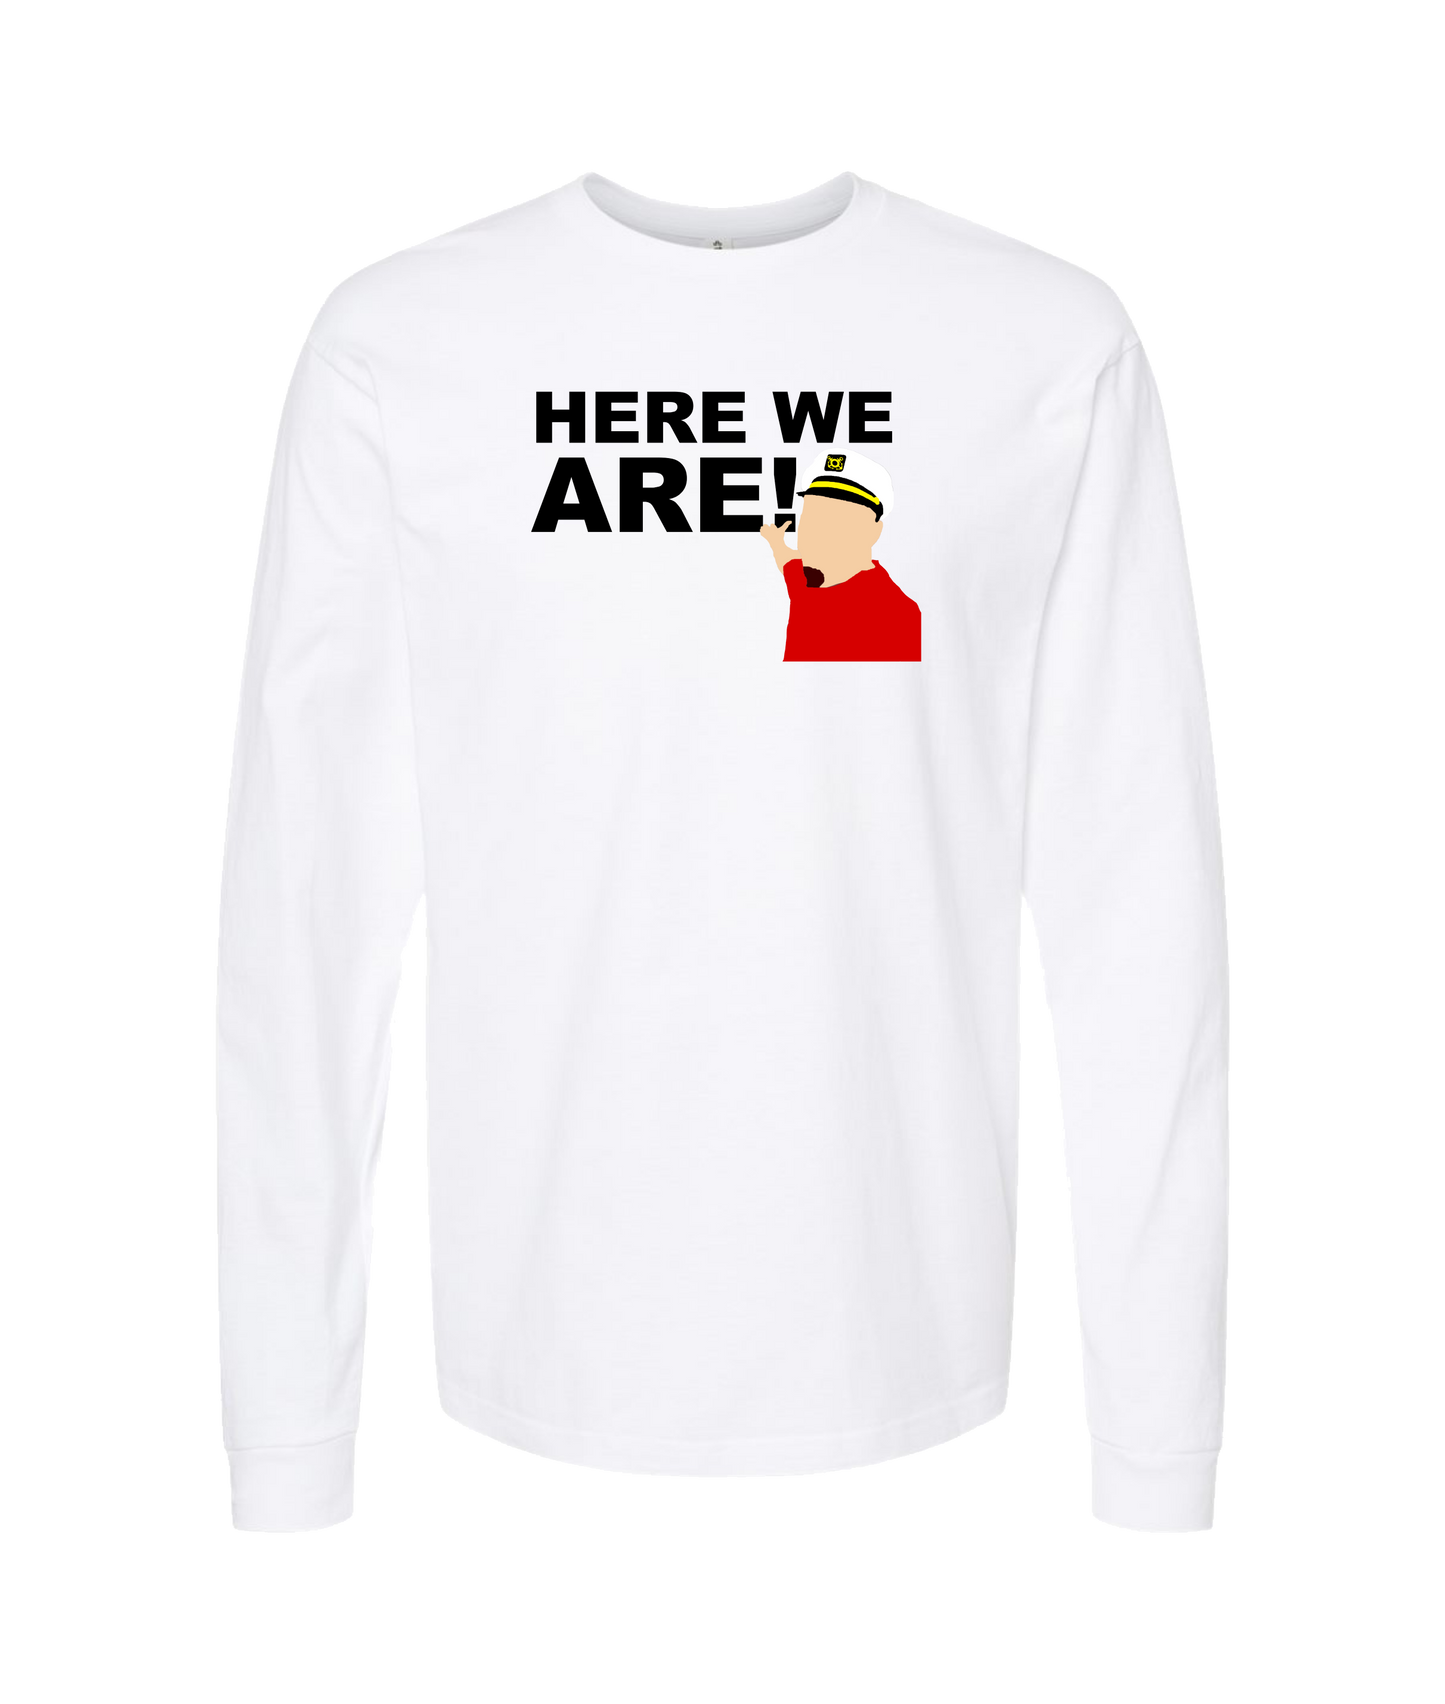 The Philly Captain's Merch is Fire - Here We Are - White Long Sleeve T